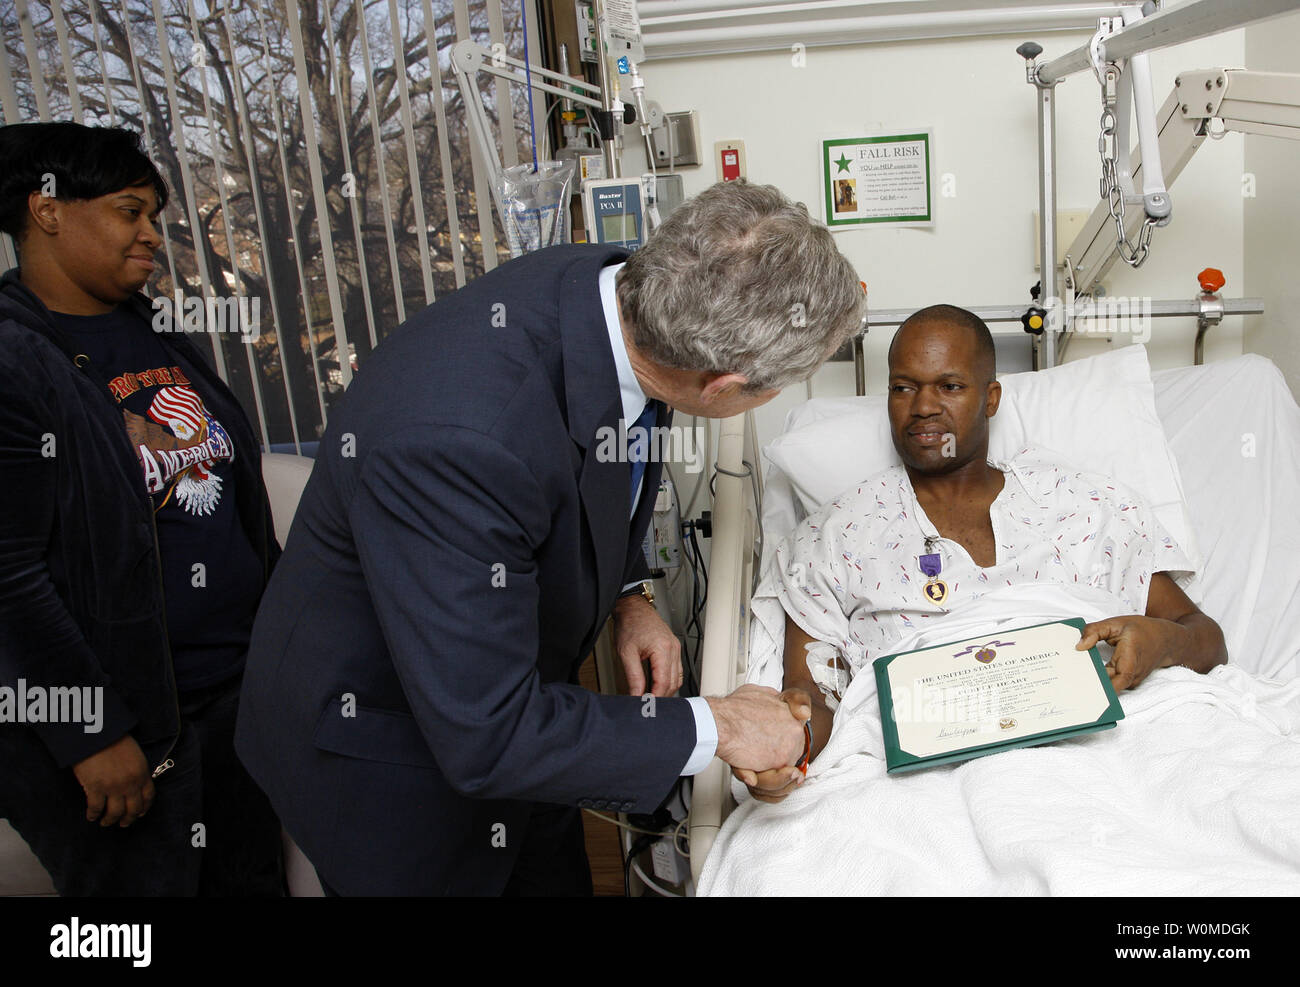 President George W. Bush shakes the hand of U.S. Army Sgt. First Class Neal Boyd of Haynesville, Louisiana, after presenting him a Purple Heart during a visit on December 22, 2008, to  Walter Reed Army Medical Center in Washington D.C., where the soldier is recovering from injuries received in the War in Iraq.  Looking on is SFC Boyd's wife, Joyce.     (UPI Photo/Eric Draper/White House) Stock Photo